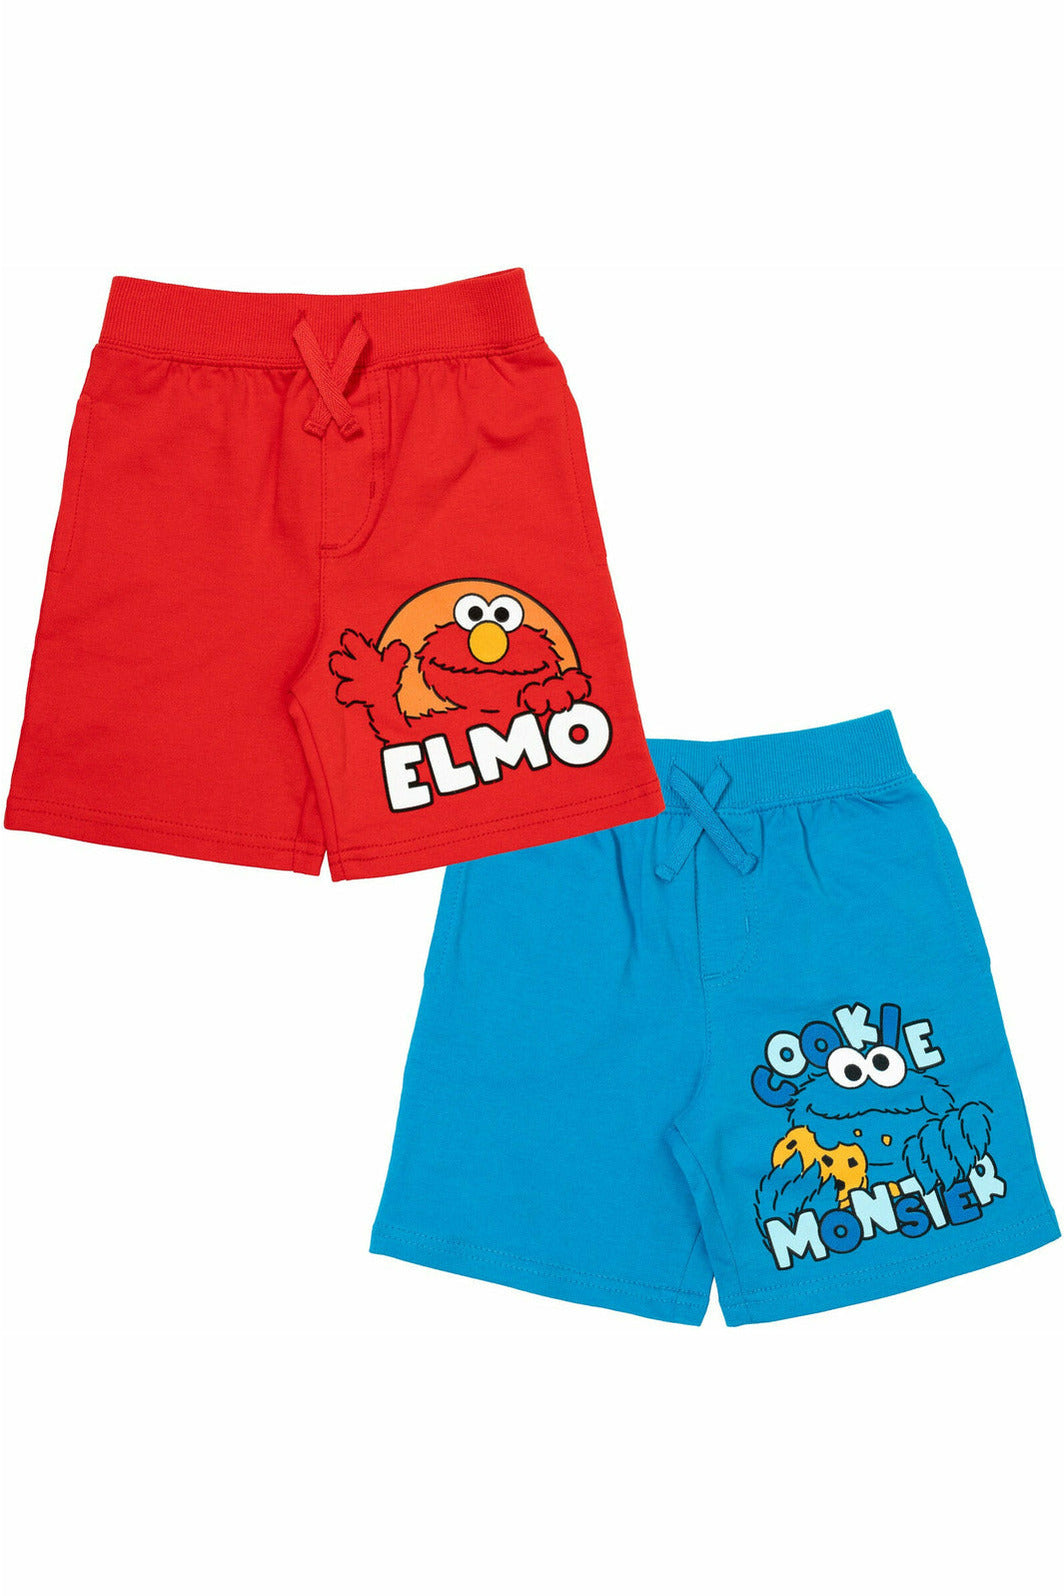 Sesame Street French Terry 2 Pack Shorts